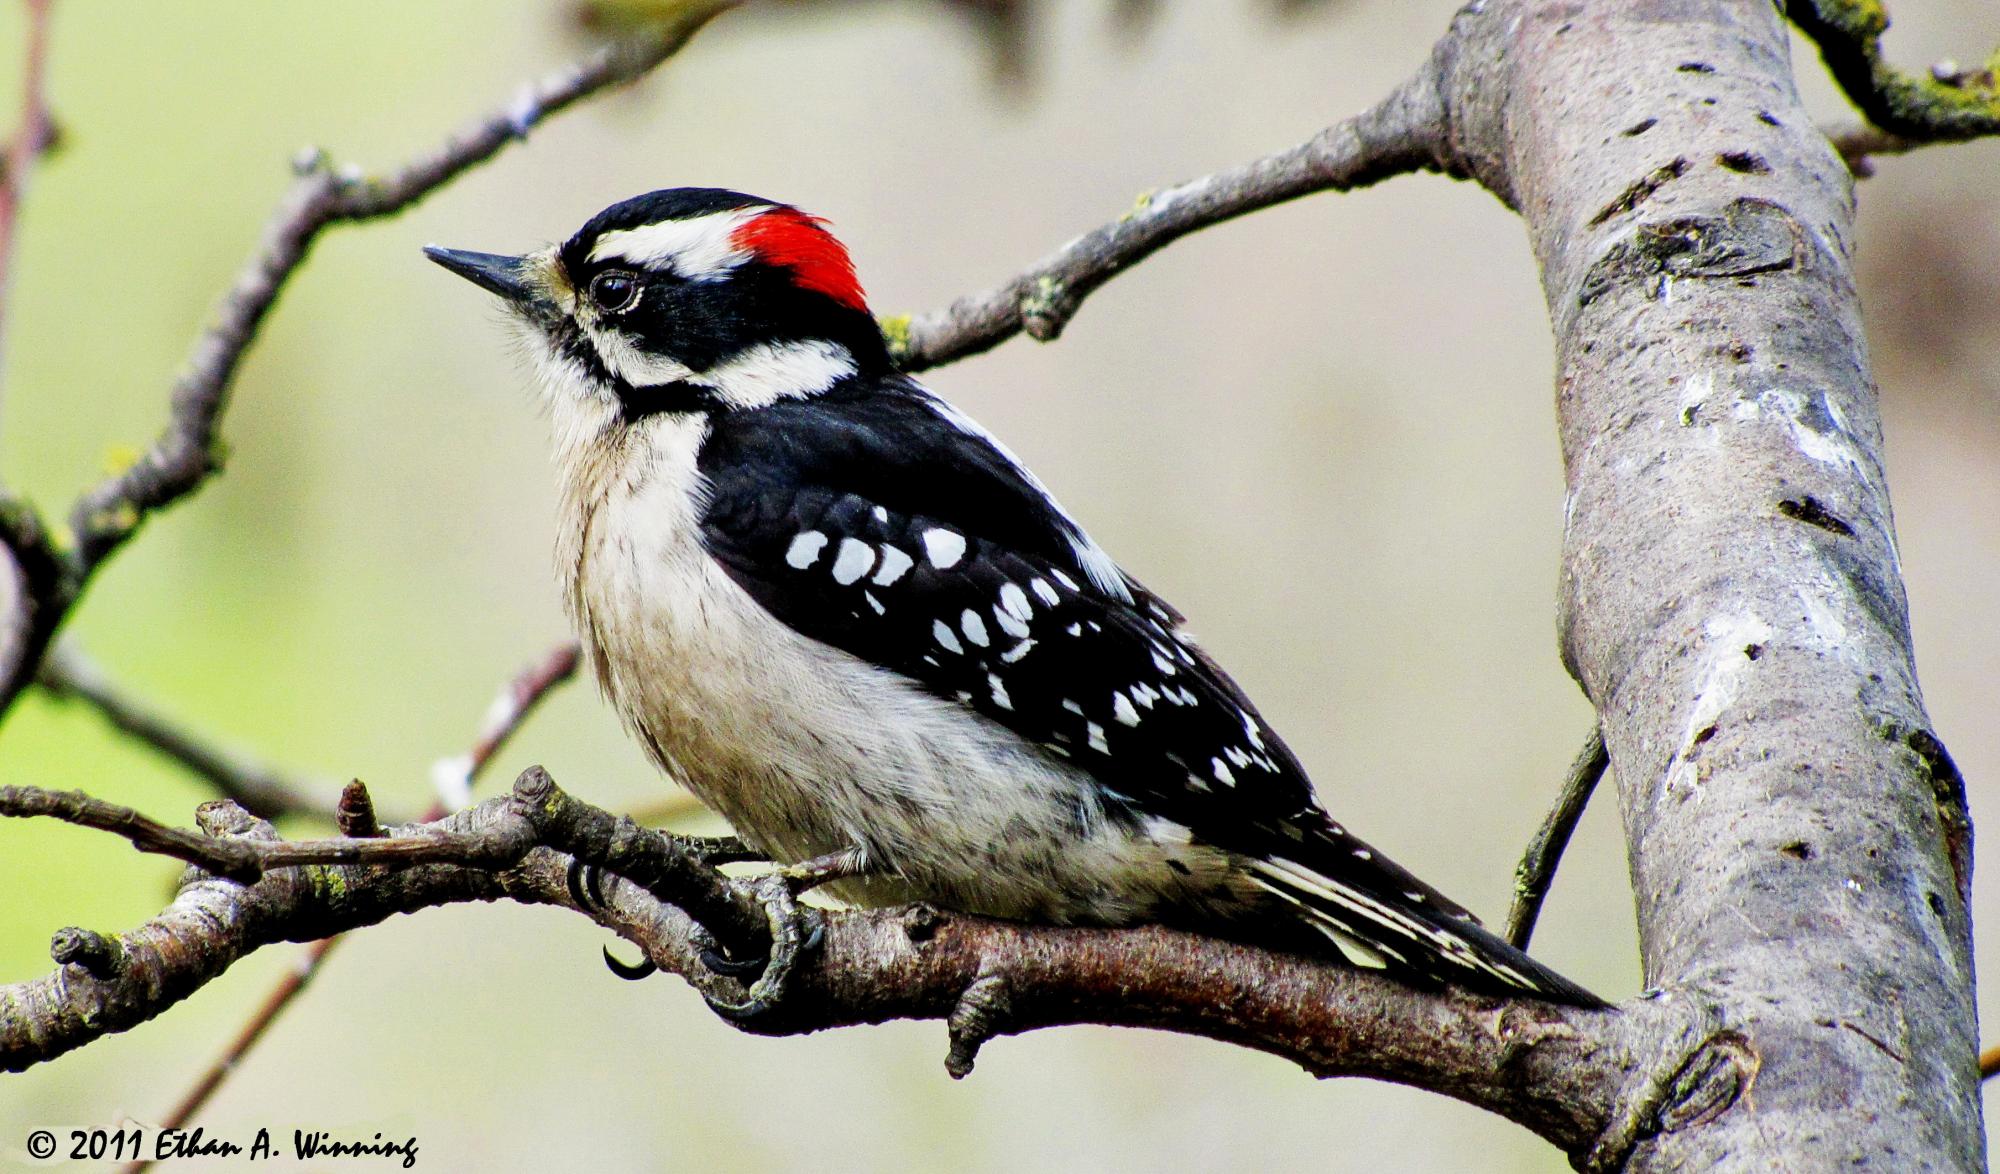 Downy Woodpecker (Dryobates pubescens) Male Downy Woodpecker on old ...